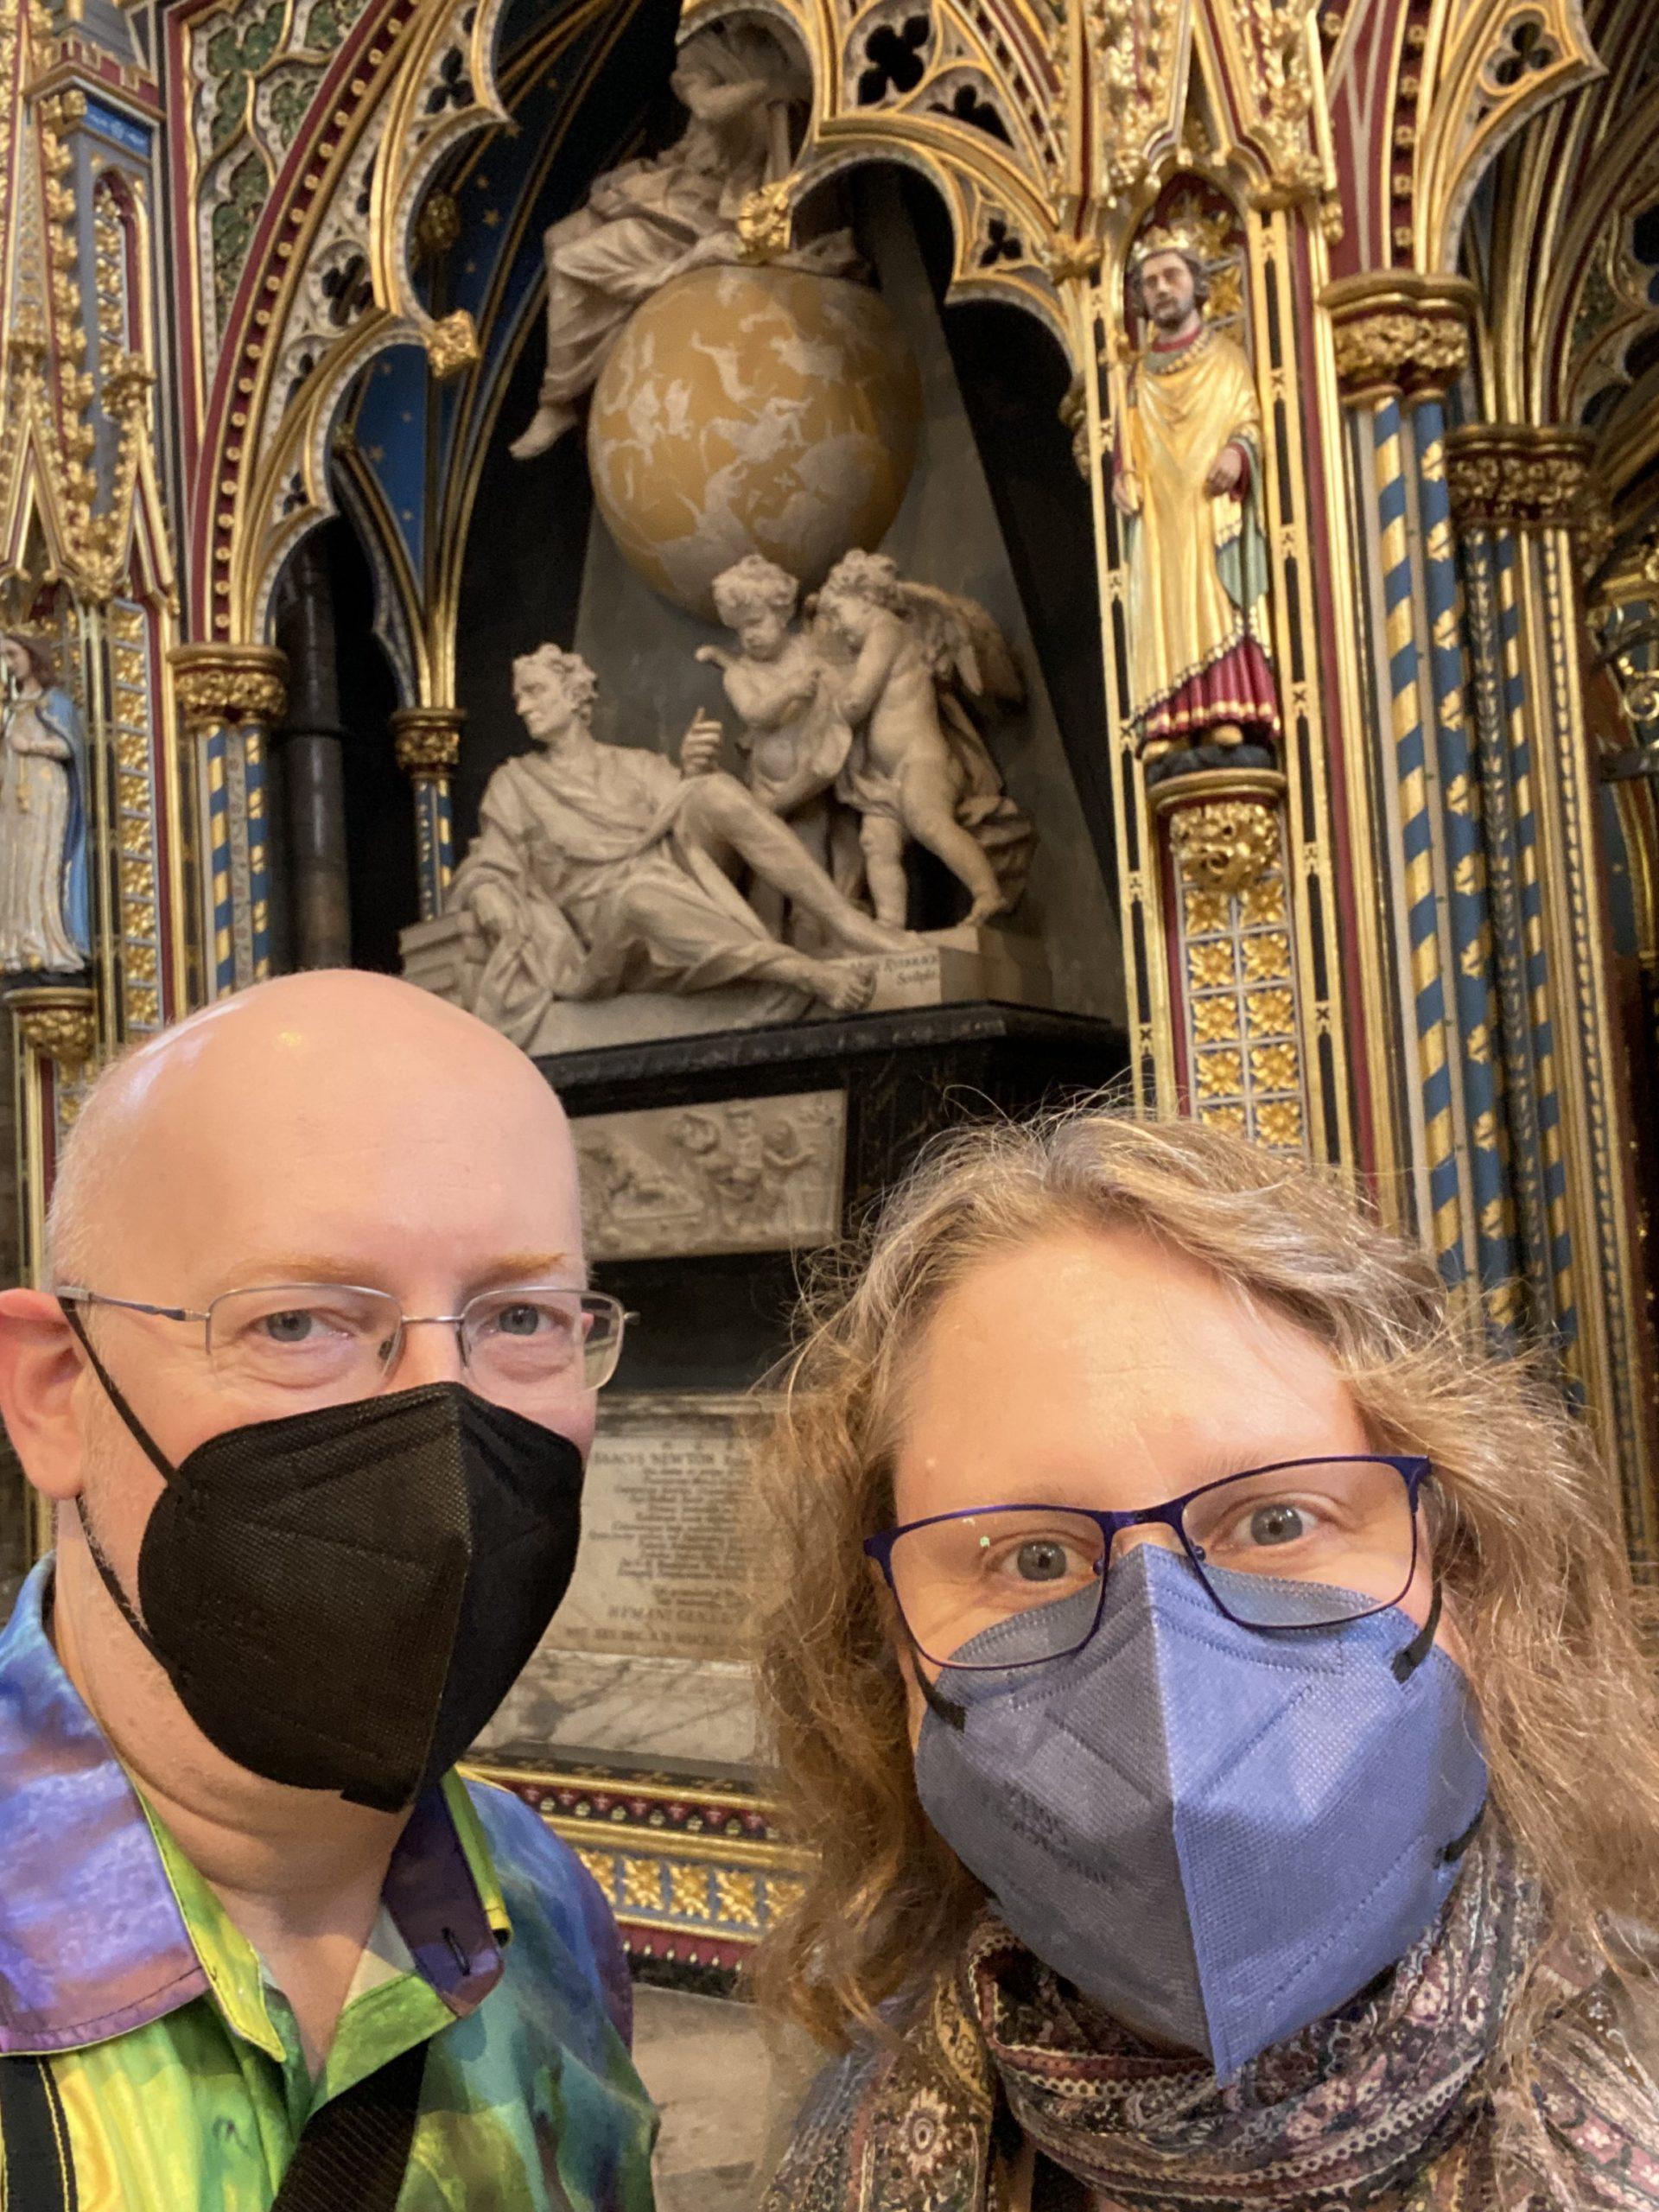 My wife and in front of Isaac Newton's very ornate tomb in Westminster Abbey.